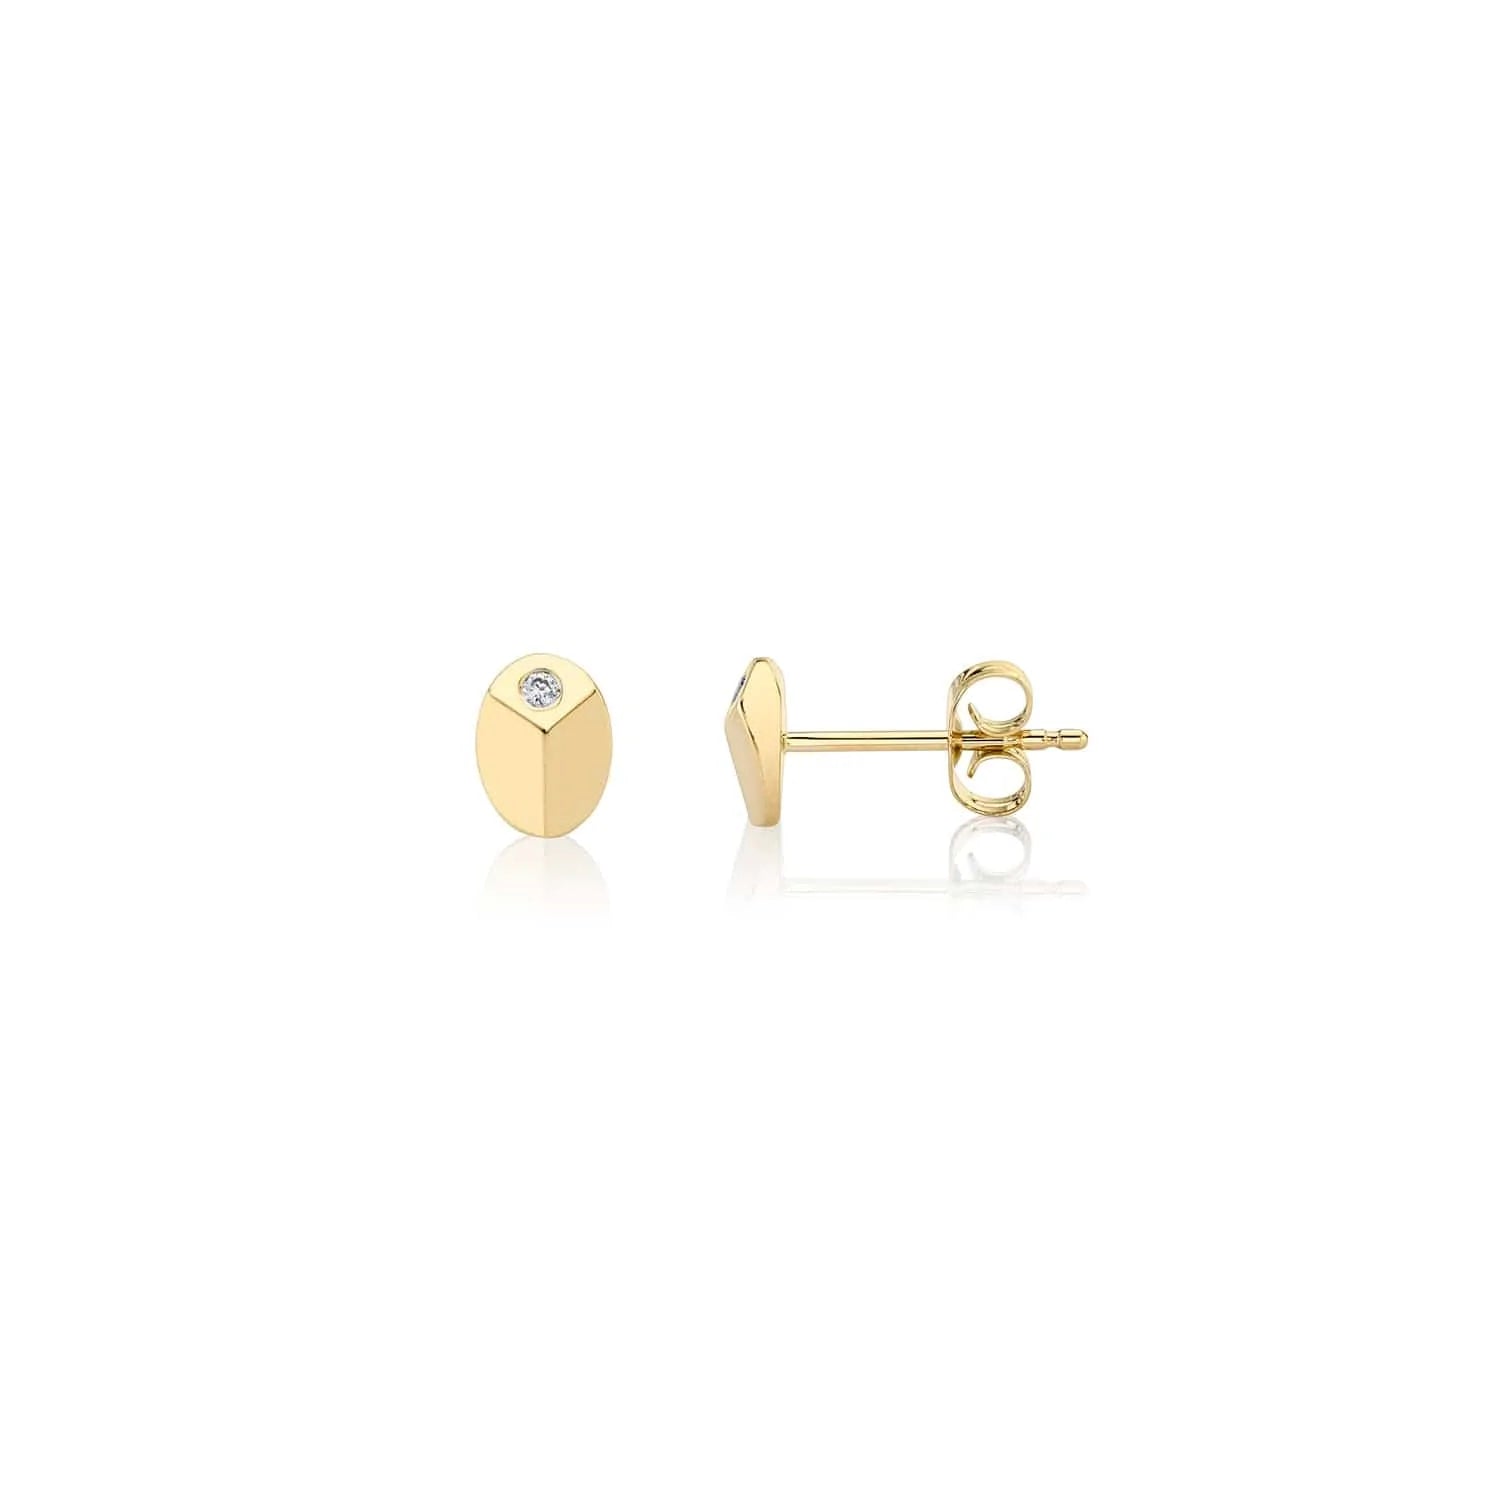 MICHAEL M Earrings 14K Yellow Gold Carve Stud with Diamonds Yellow Gold ER451YG